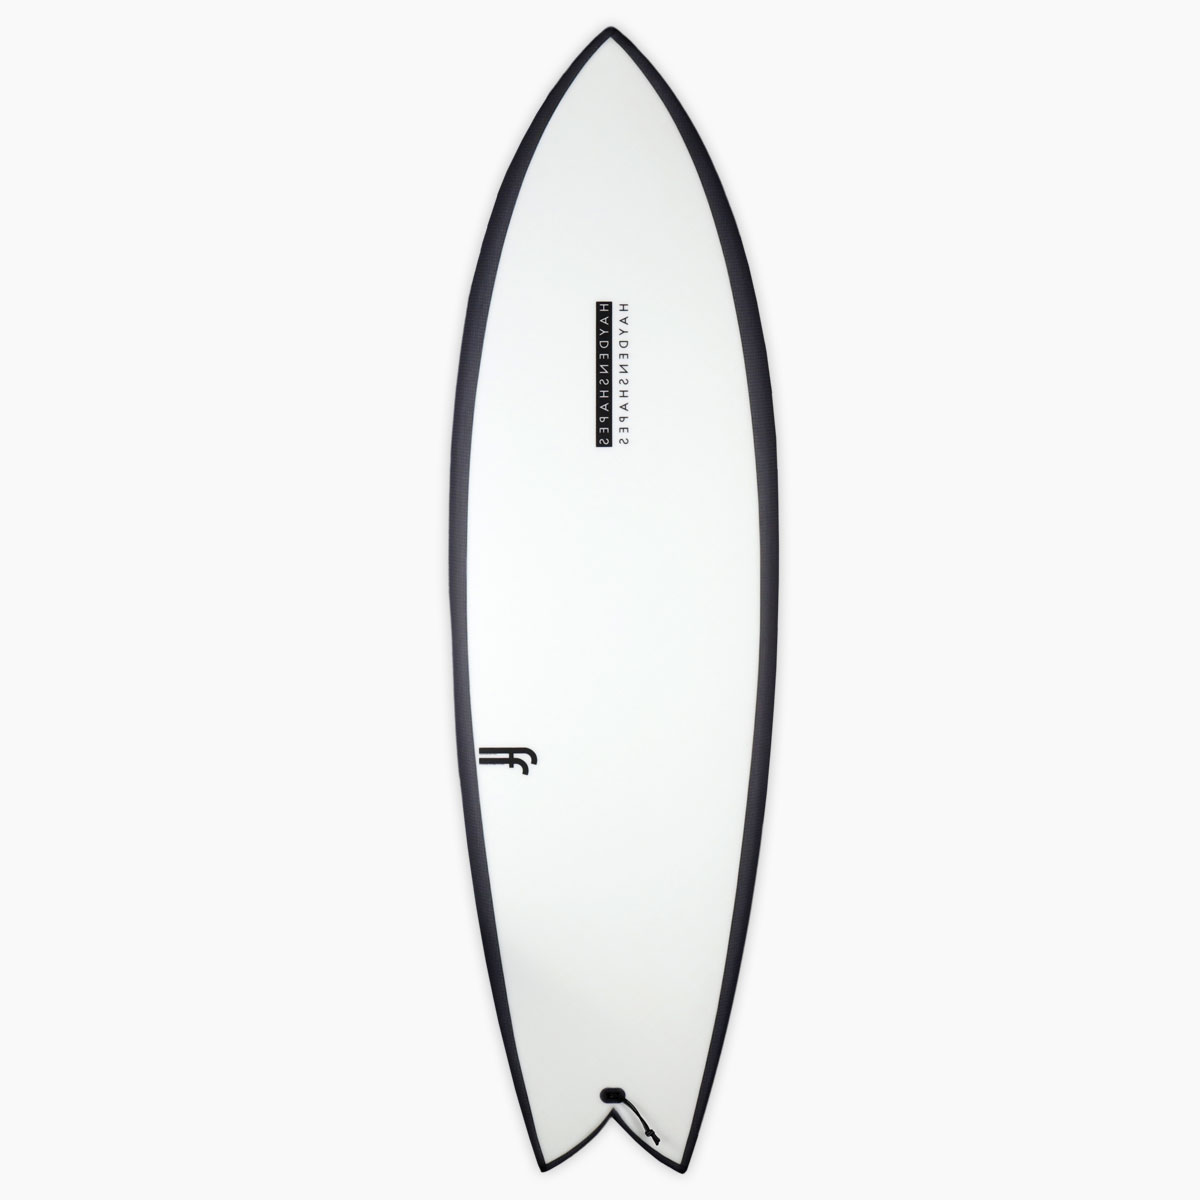 SurfBoardNet ヘイデンシェイプス ヒプトクリプト ツイン HAYDENSHAPES HYPTO KRYPTO TWIN fcs2  CLEAR color エフシーエス クリア 5'8'' サーフボード 即納